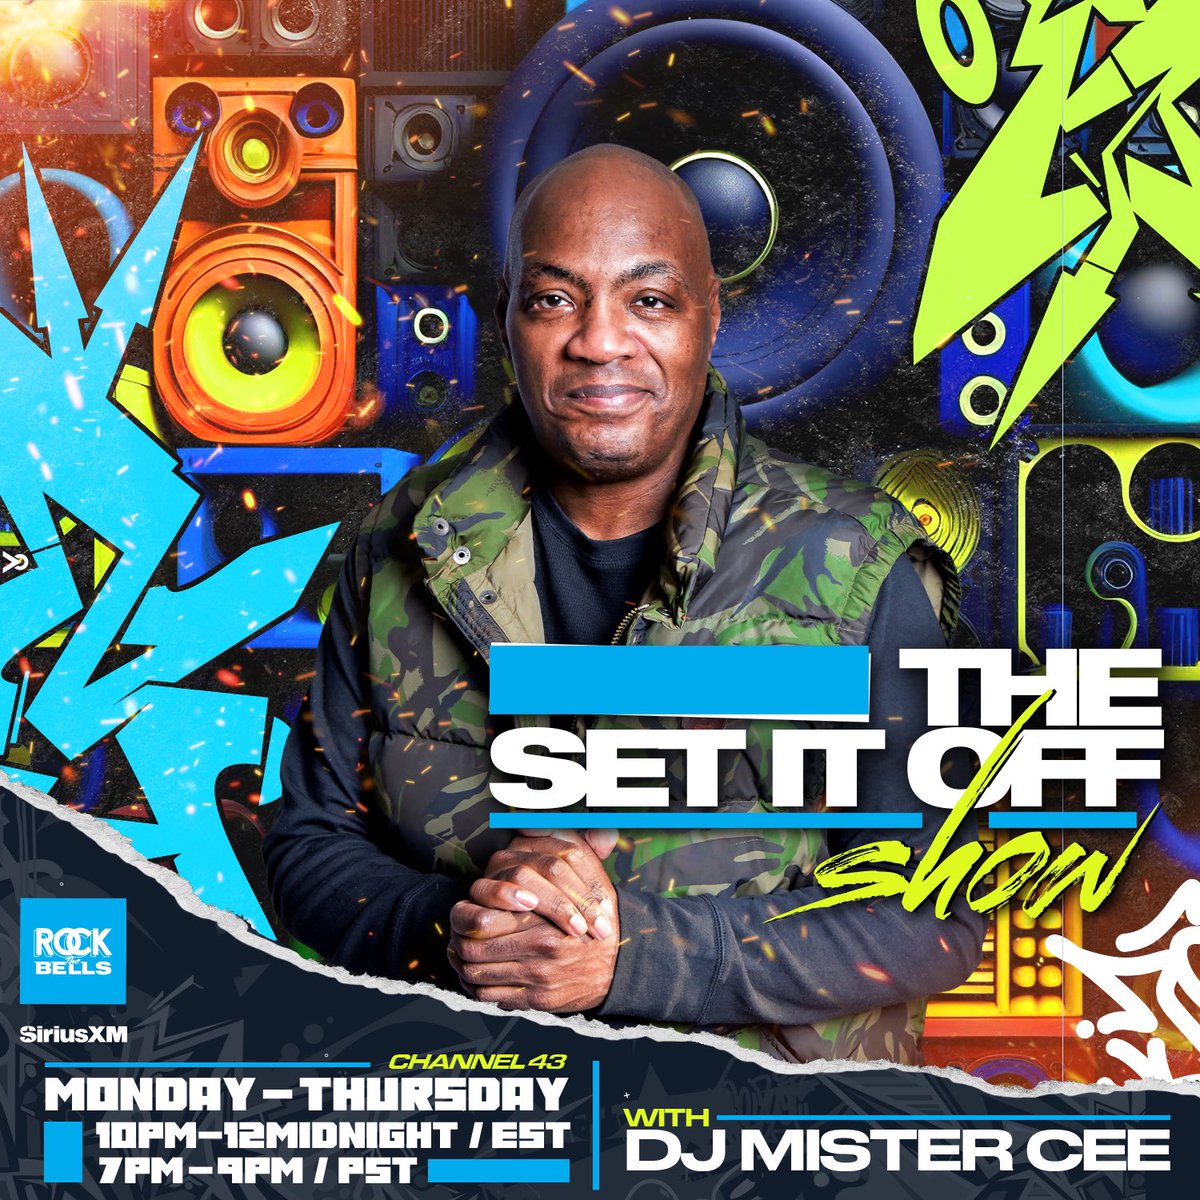 2NITE!!! THE SET IT OFF SHOW WIT @djmistercee AIRING MON-THURS 10PM-12MID(EAST COAST) 7PM-9PM(WEST COAST) ON LL COOL J @llcoolj ROCK THE BELLS RADIO @rockthebells ON SIRIUS XM CHANNEL 43!!! @siriusxm PLAYING CLASSIC/TIMELESS HIP HOP FROM THE 80’s 90’s & 2000’S!!!